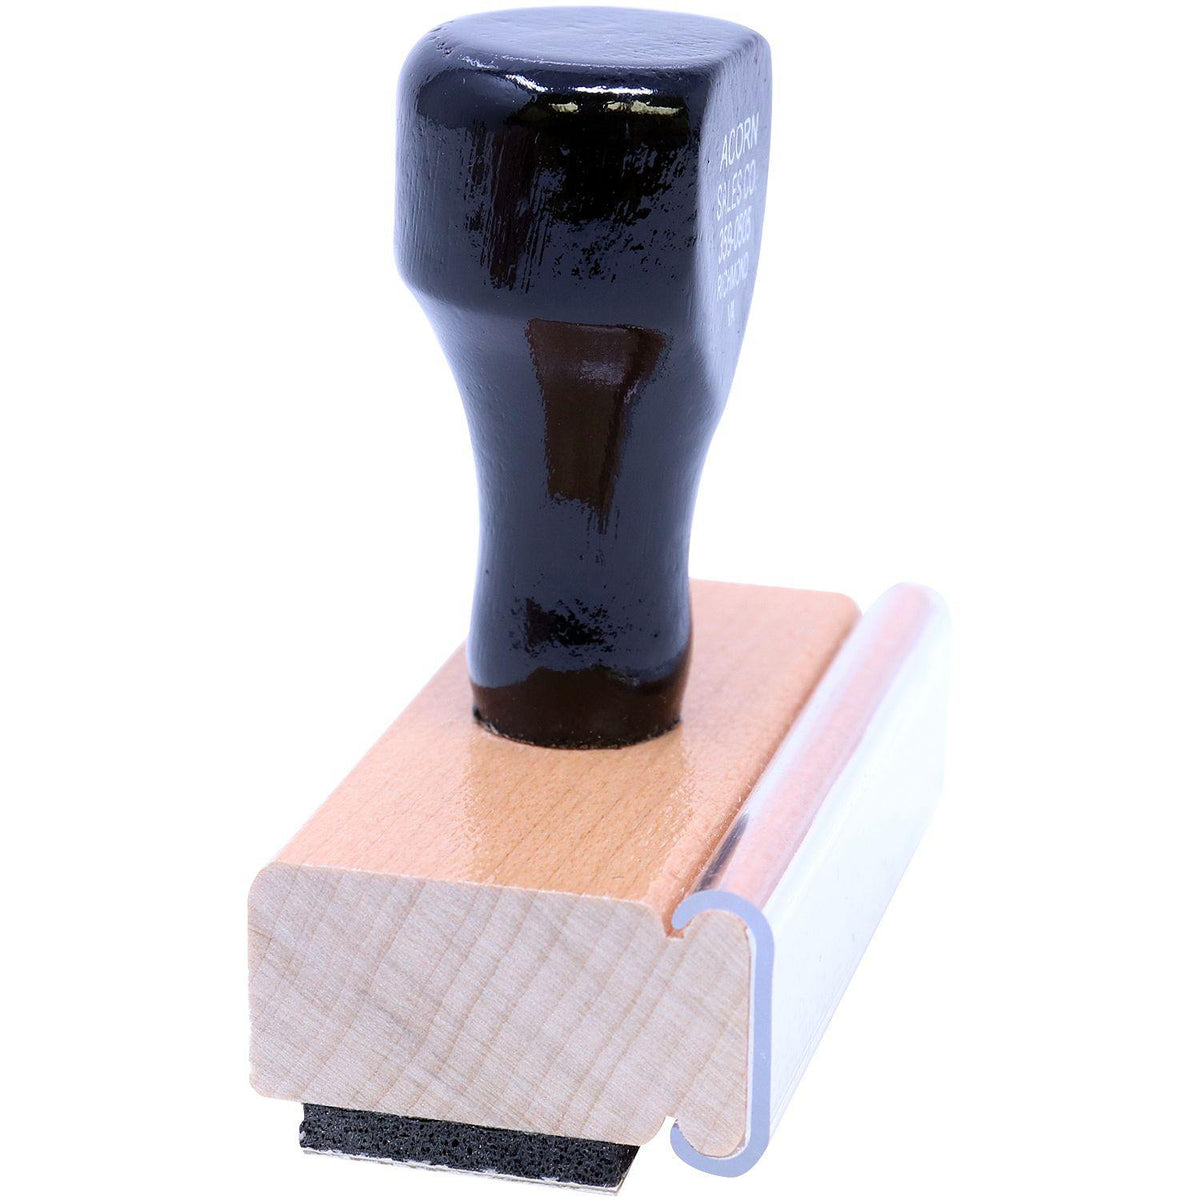 Side View of Fantastic with Icons Rubber Stamp at an Angle